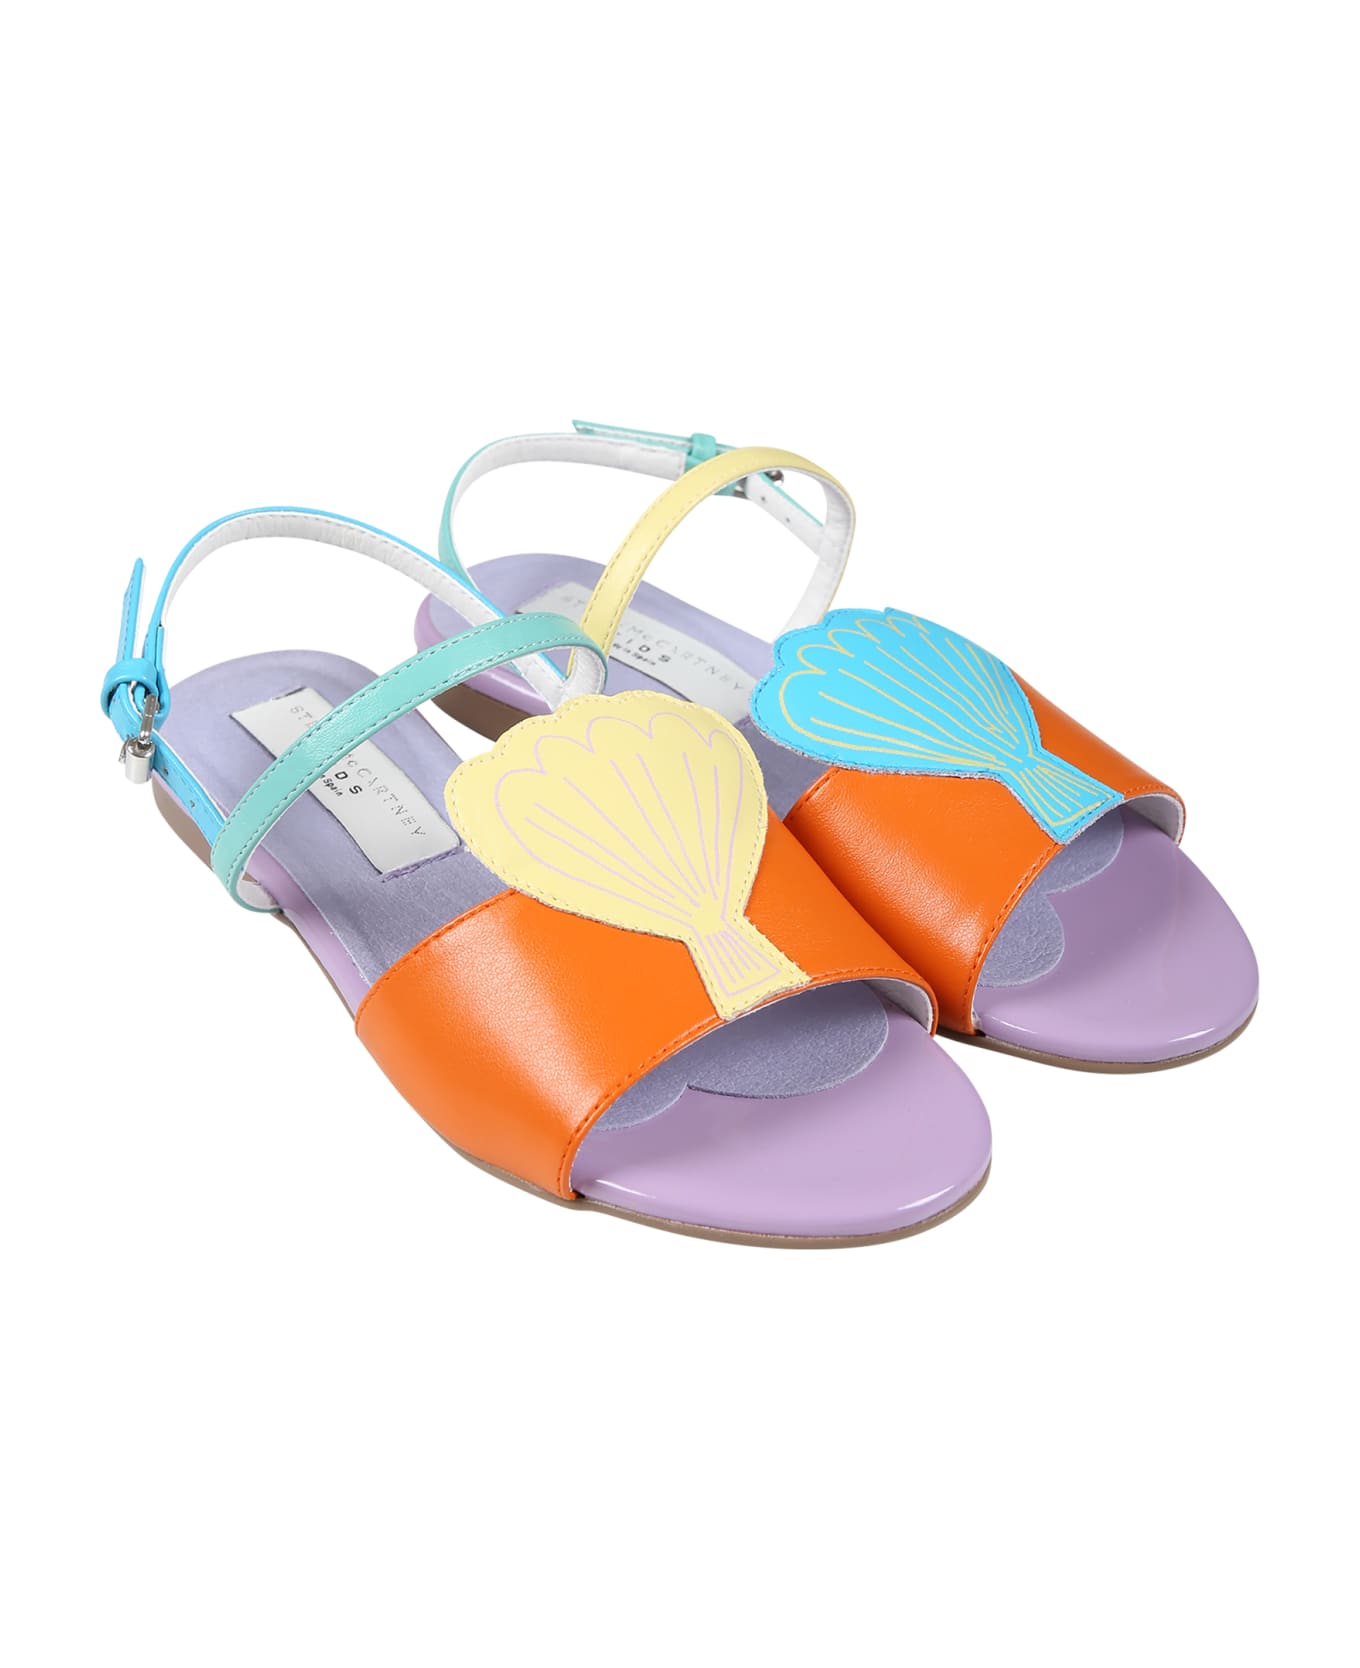 Stella McCartney Kids Multicolor Sandals For Girl With Seashell - Multicolor